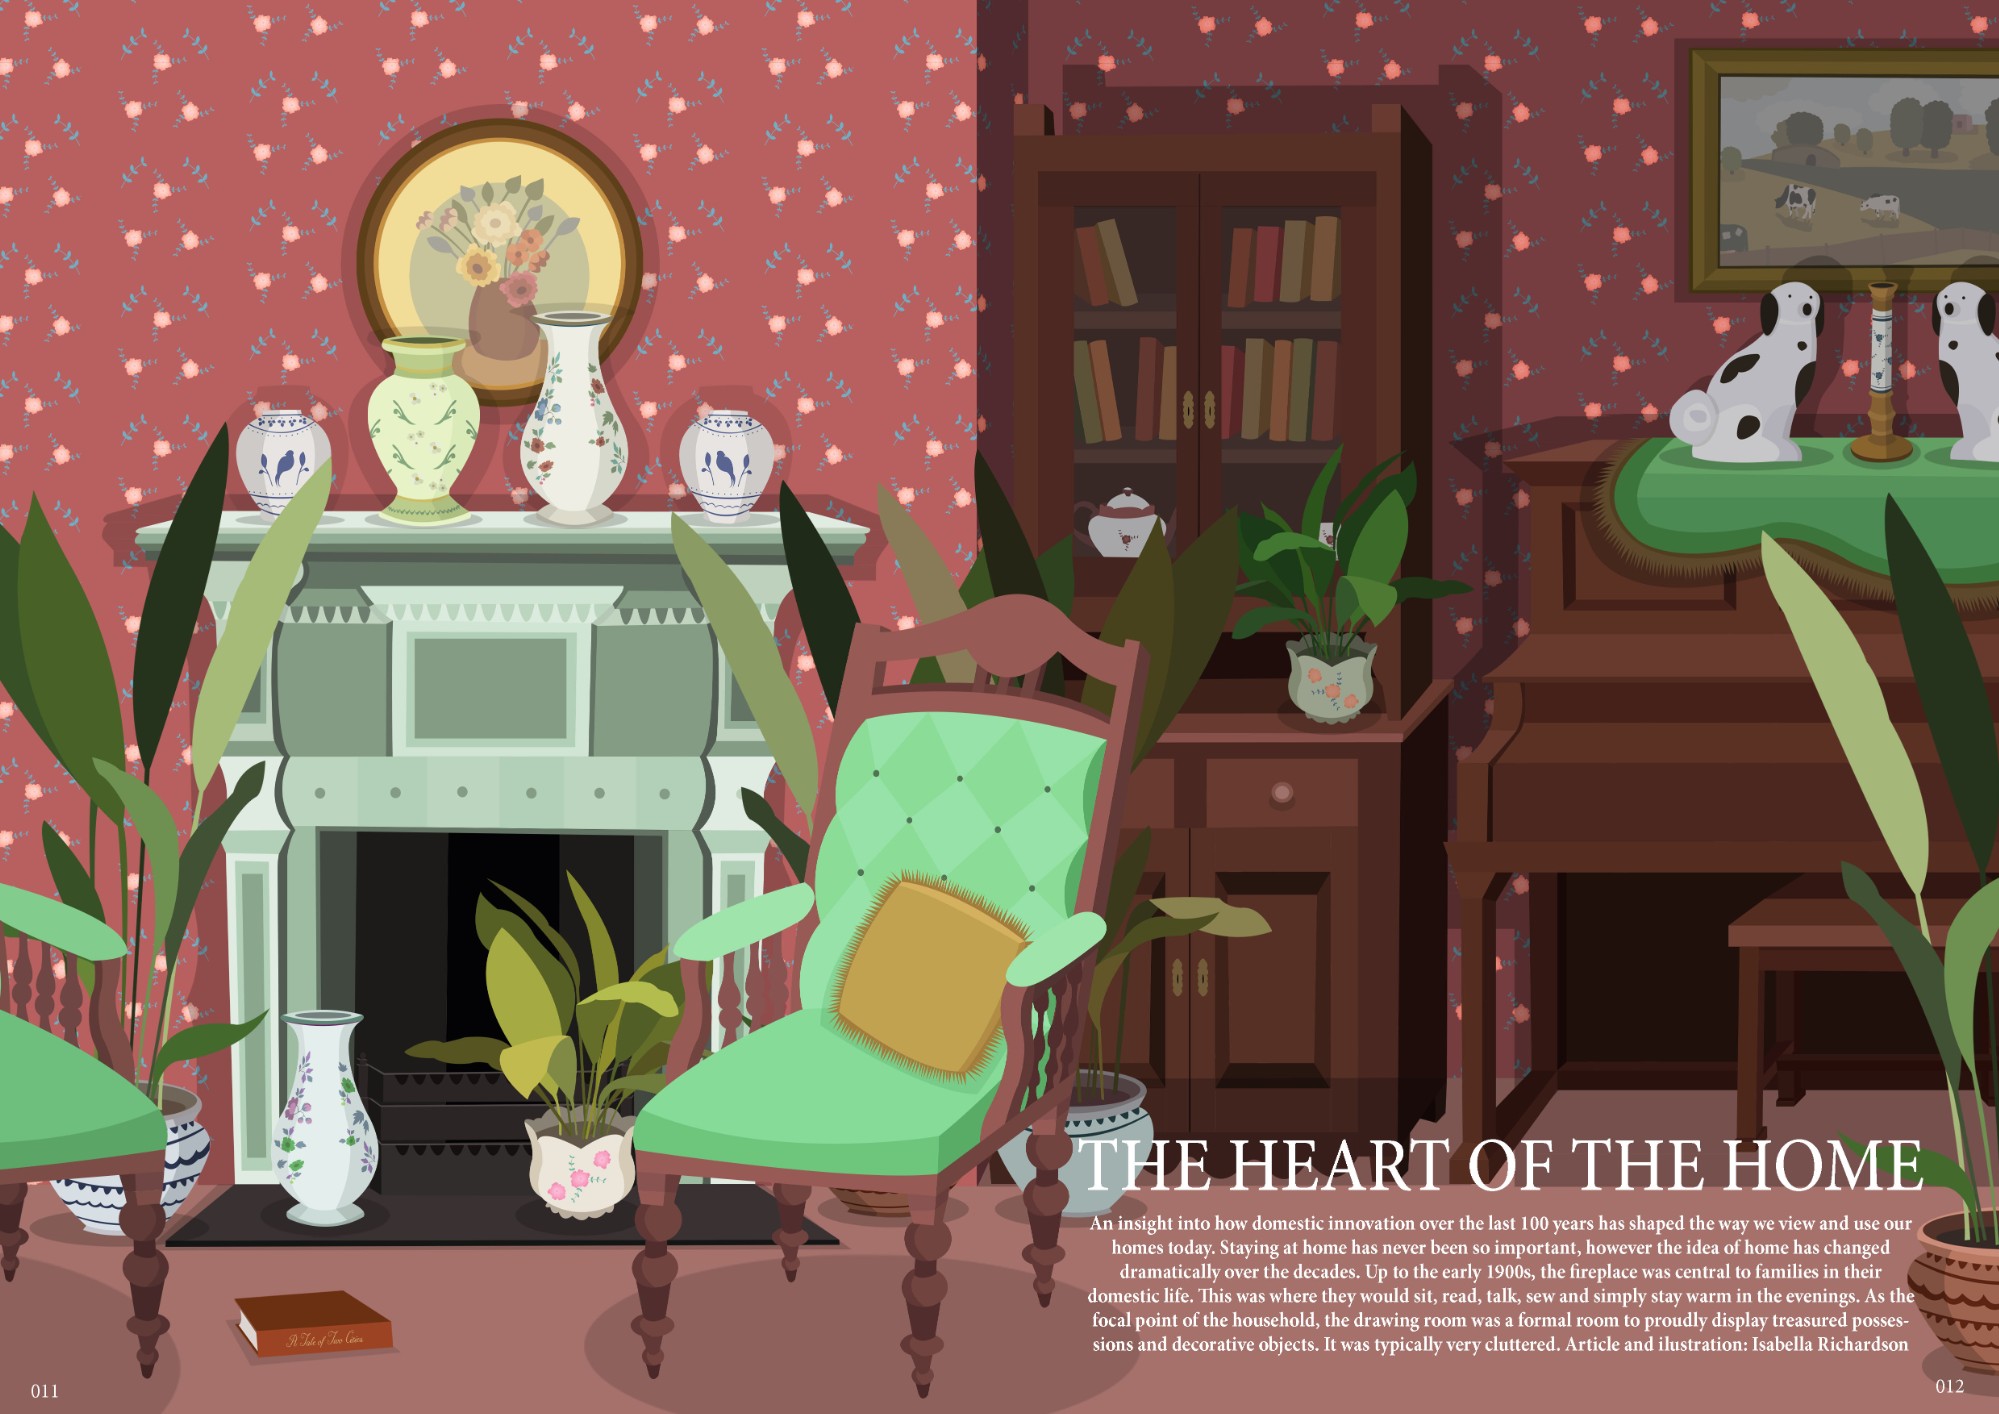 The Heart of the Home - a double page illustration for the title page of my magazine article about domestic innovation and ideas about what is important to us within our homes, ideas which have shaped how we view and use our homes throughout the last 100 years. Starting with a 1900’s living room in which the fireplace is at the focal point.